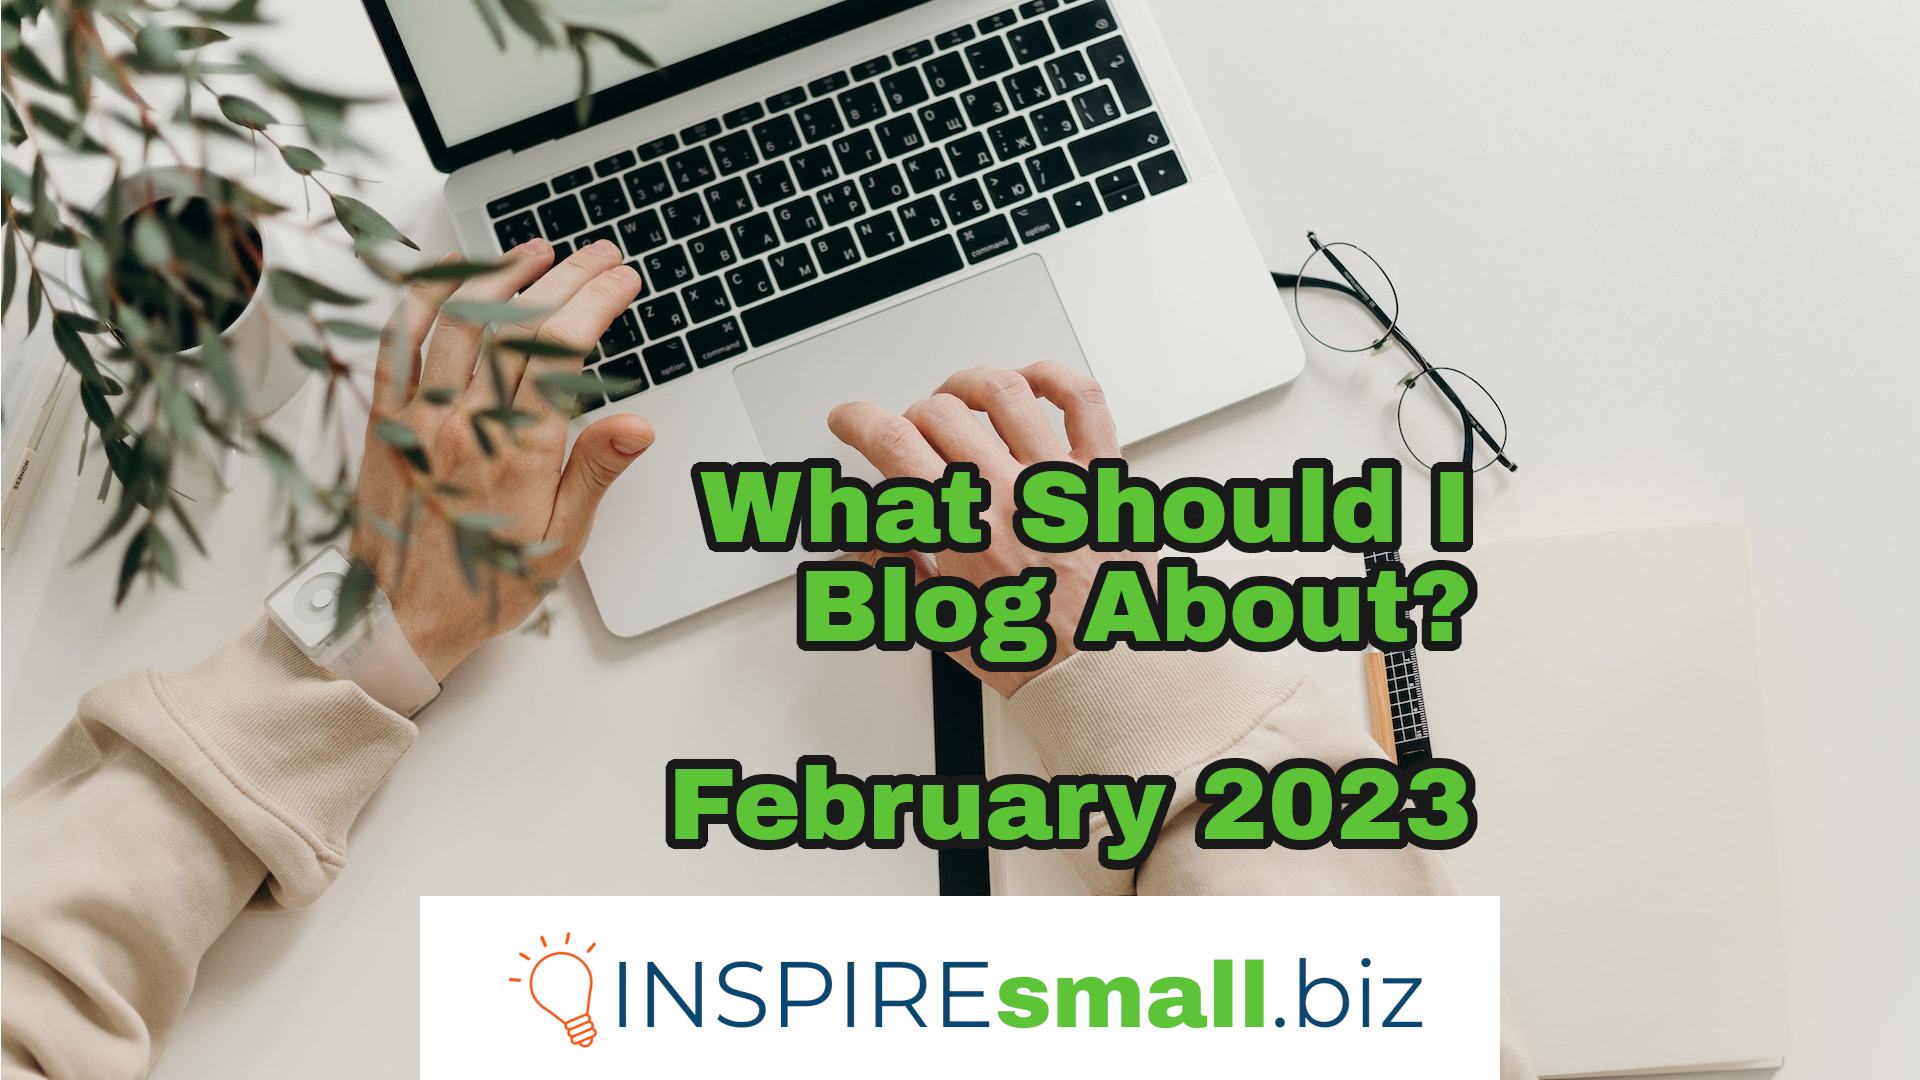 What Should I Blog About? February 2023